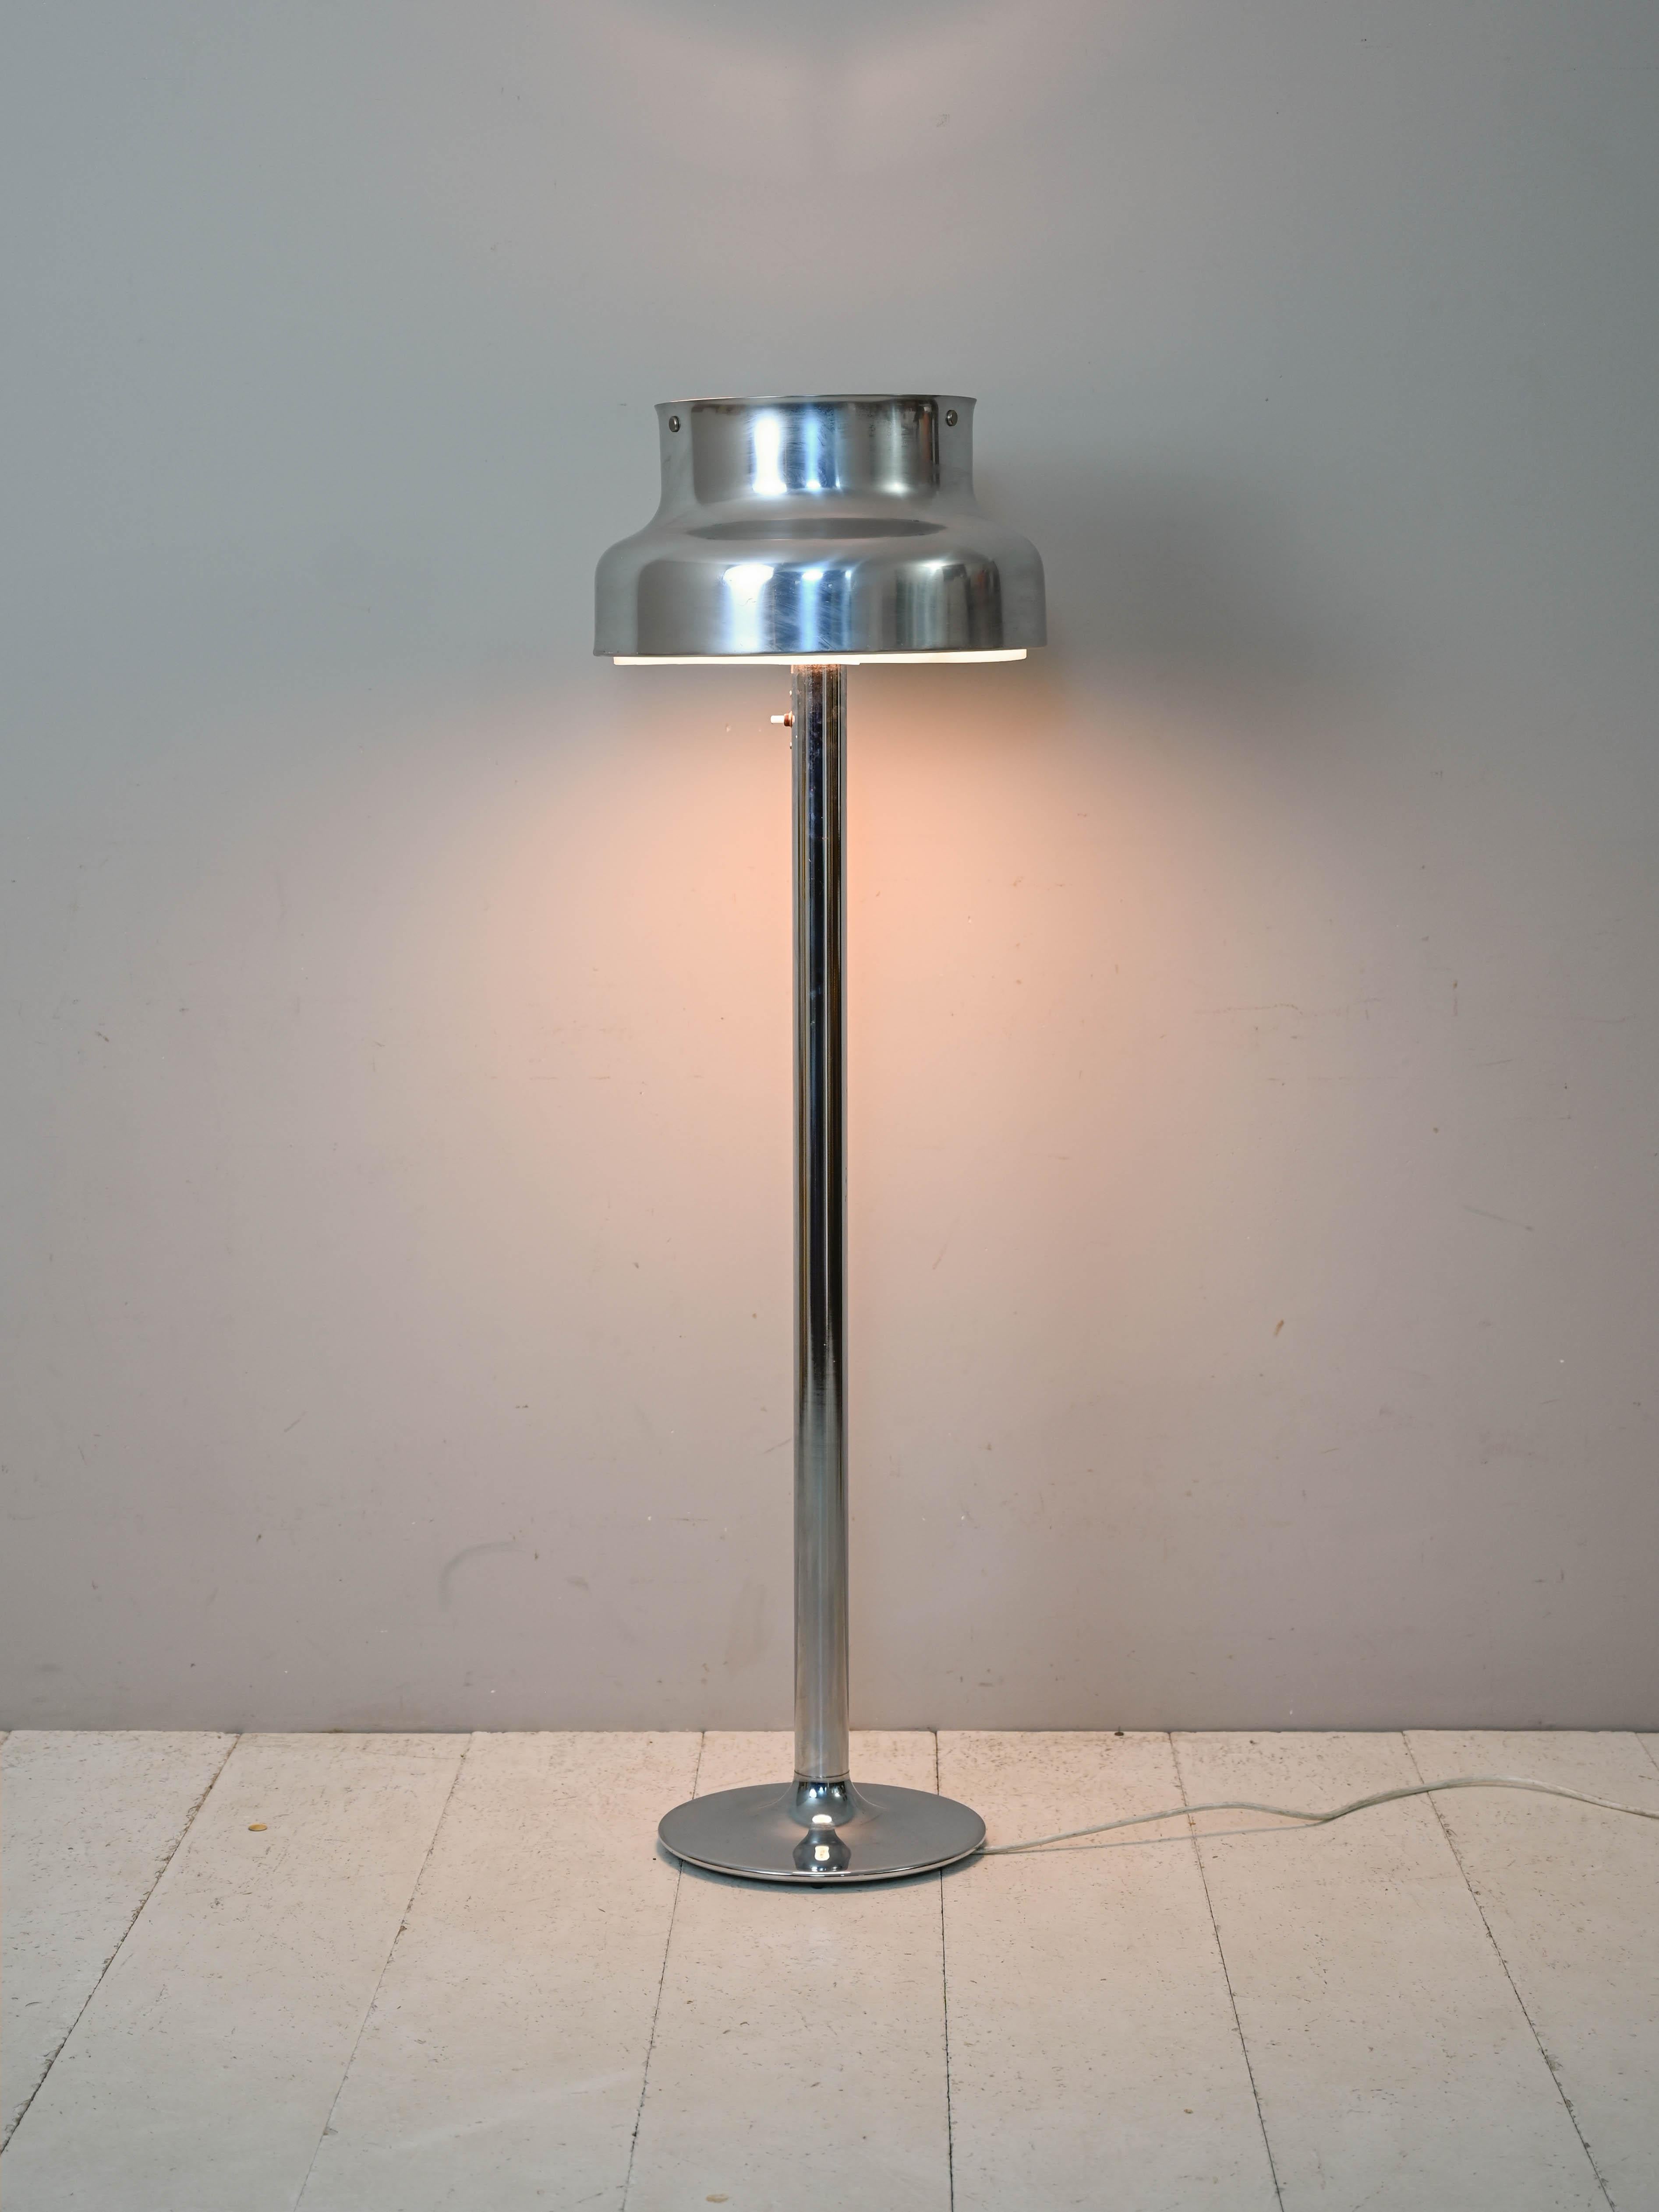 Floor lamp designed in 1968 for Ateljé Lyktan, Sweden.

This floor-standing version of the famous Bumling icon is striking in its silver color. 
Known for the shape of the lampshade with modern lines that are still absolutely current, it features